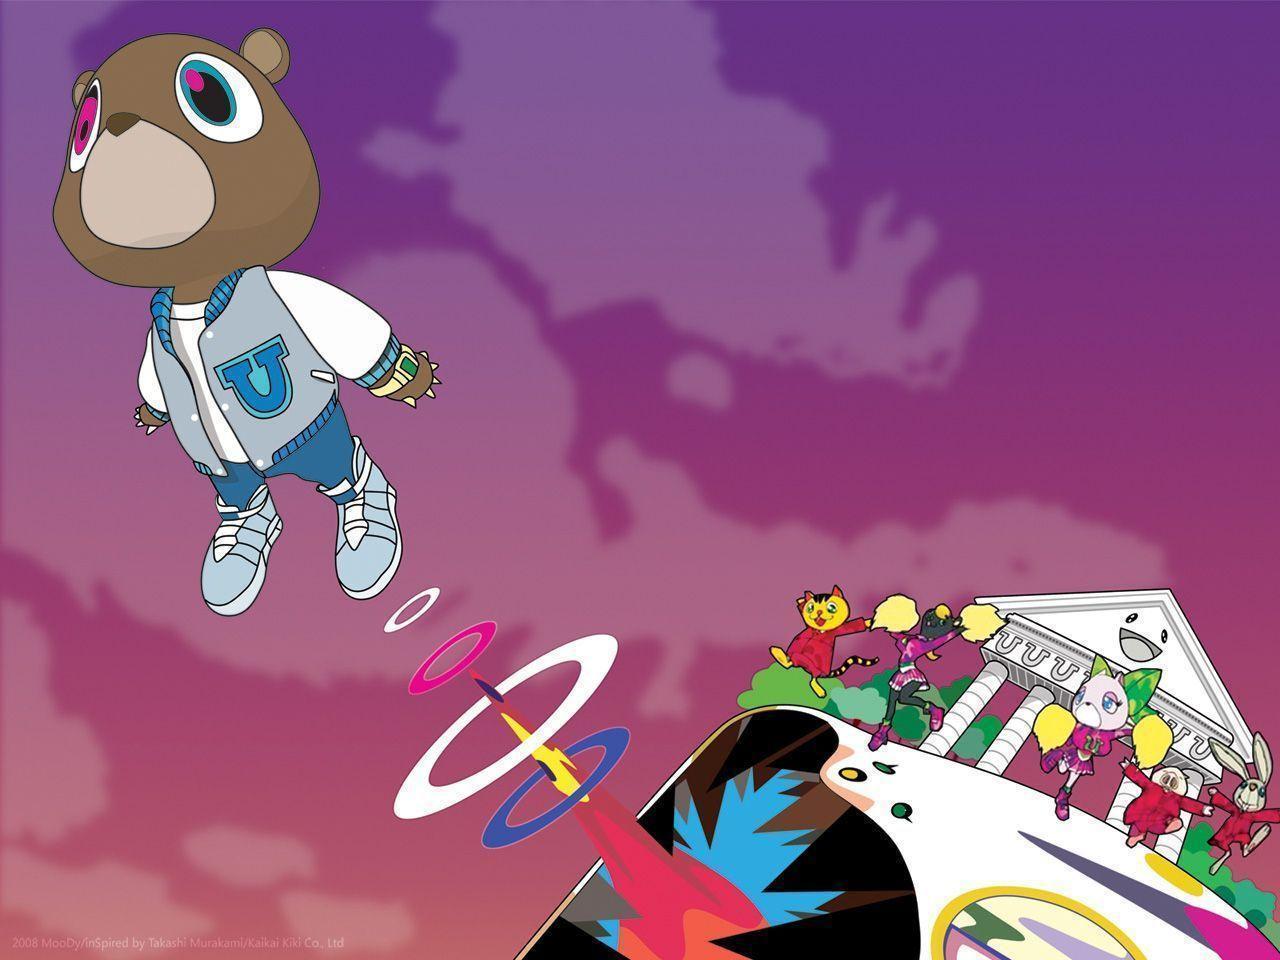 Kanye West Graduation Wallpapers Image & Pictures